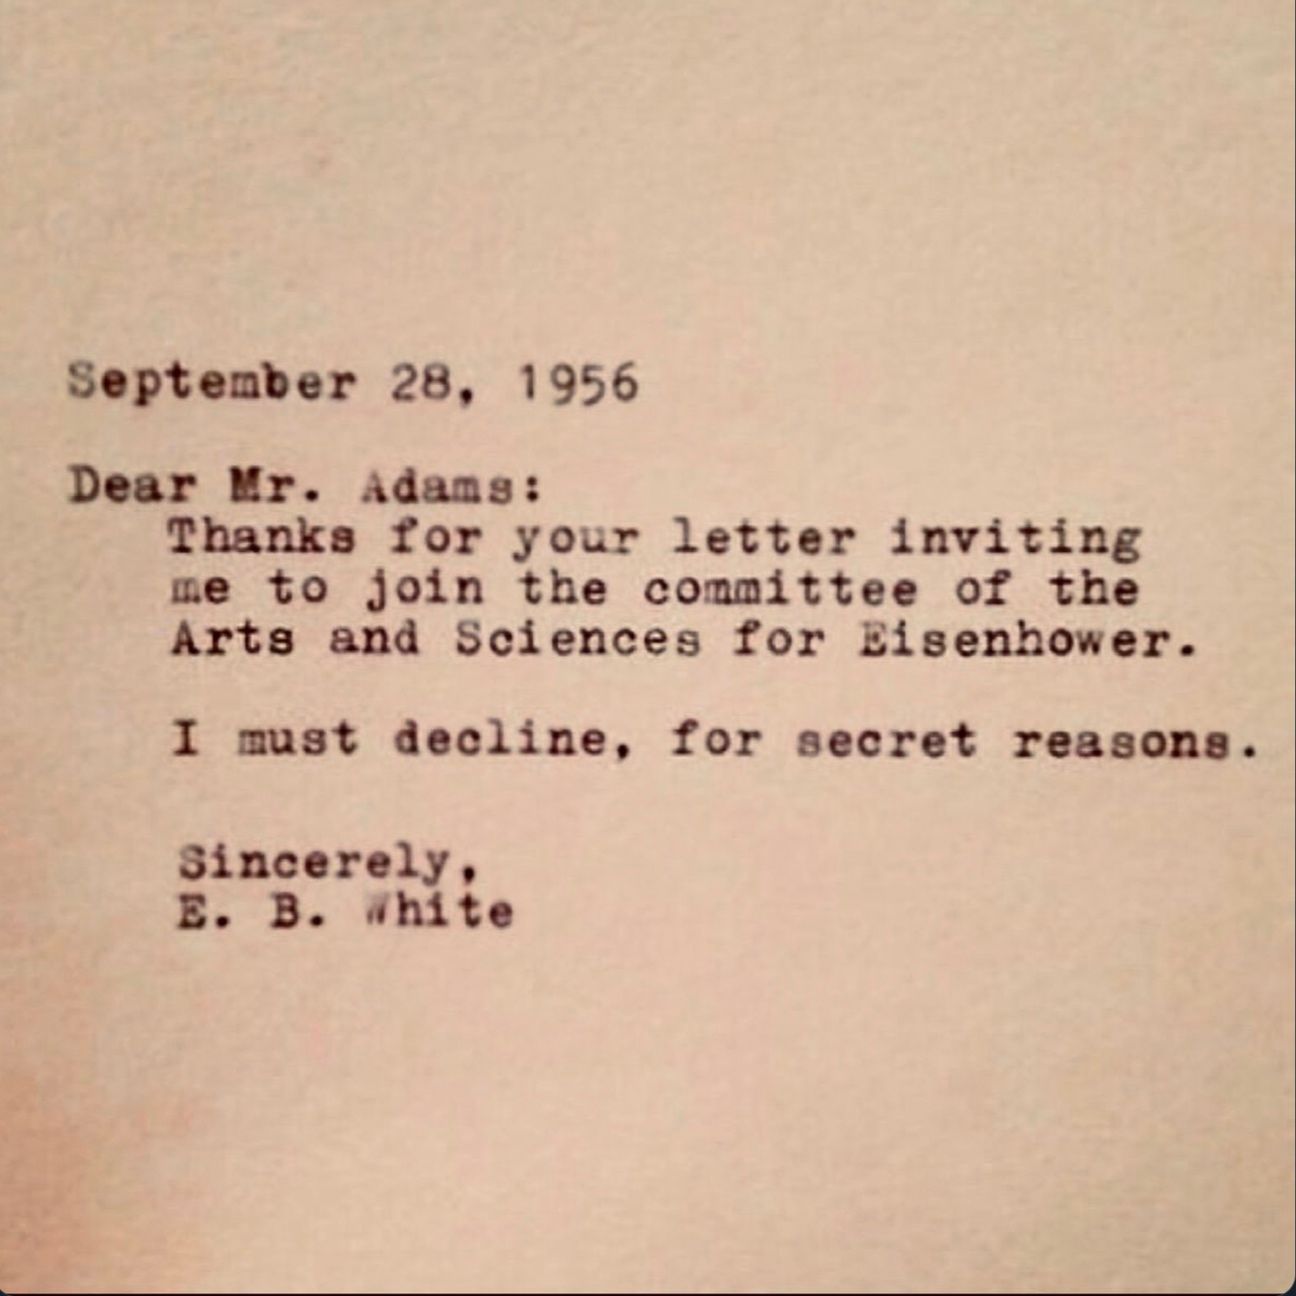 A typed letter dated 1956 stating "Dear Mr. Adams: Thanks for your letter inviting me to join the committee of the Arts and Sciences for Eisenhower. I must decline, for secret reasons. Sincerely, E.B. White"